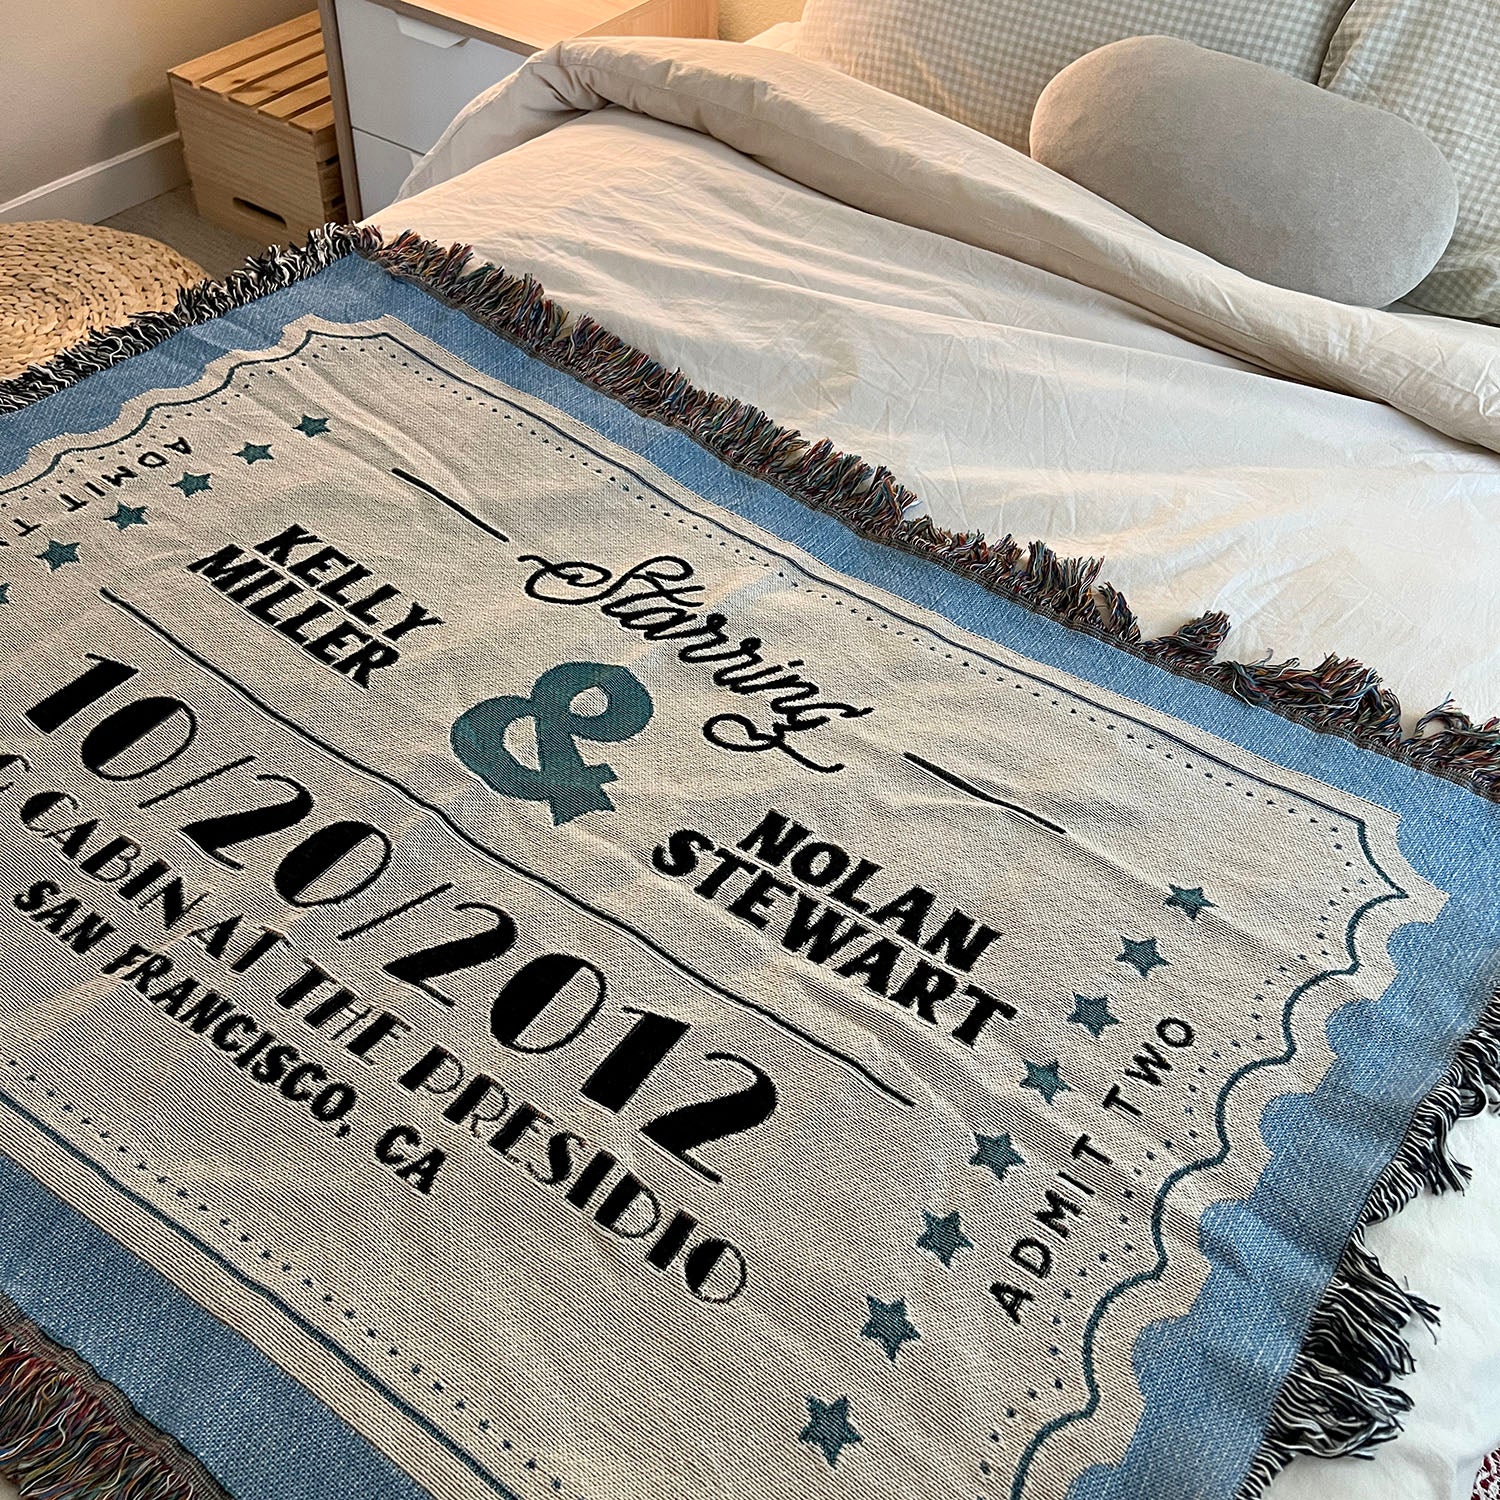 Personalized Couples Movie Ticket Woven Blanket - Woven - Personalized Gifts for Couples, Custom Birthday Gifts, Custom Anniversary Gifts | Relatable Basic